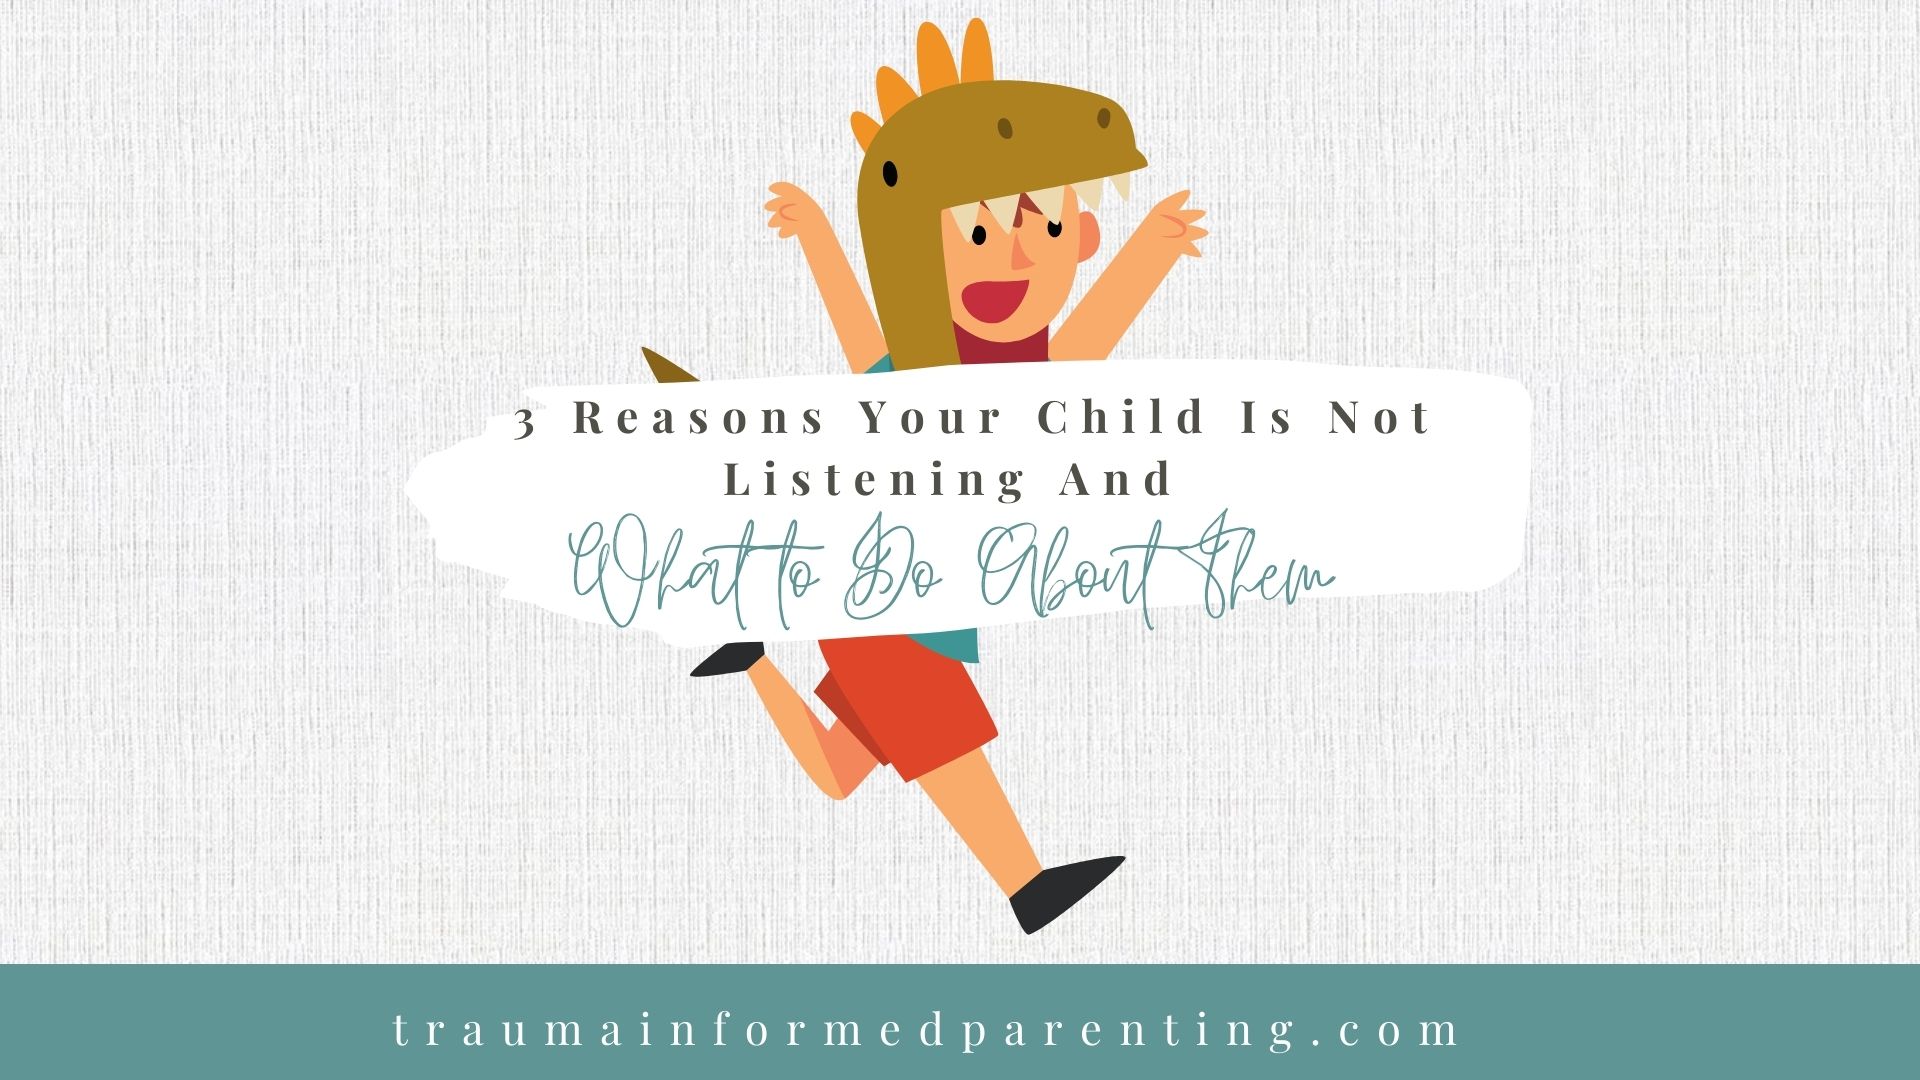 3 Reasons Your Child Isn't listening